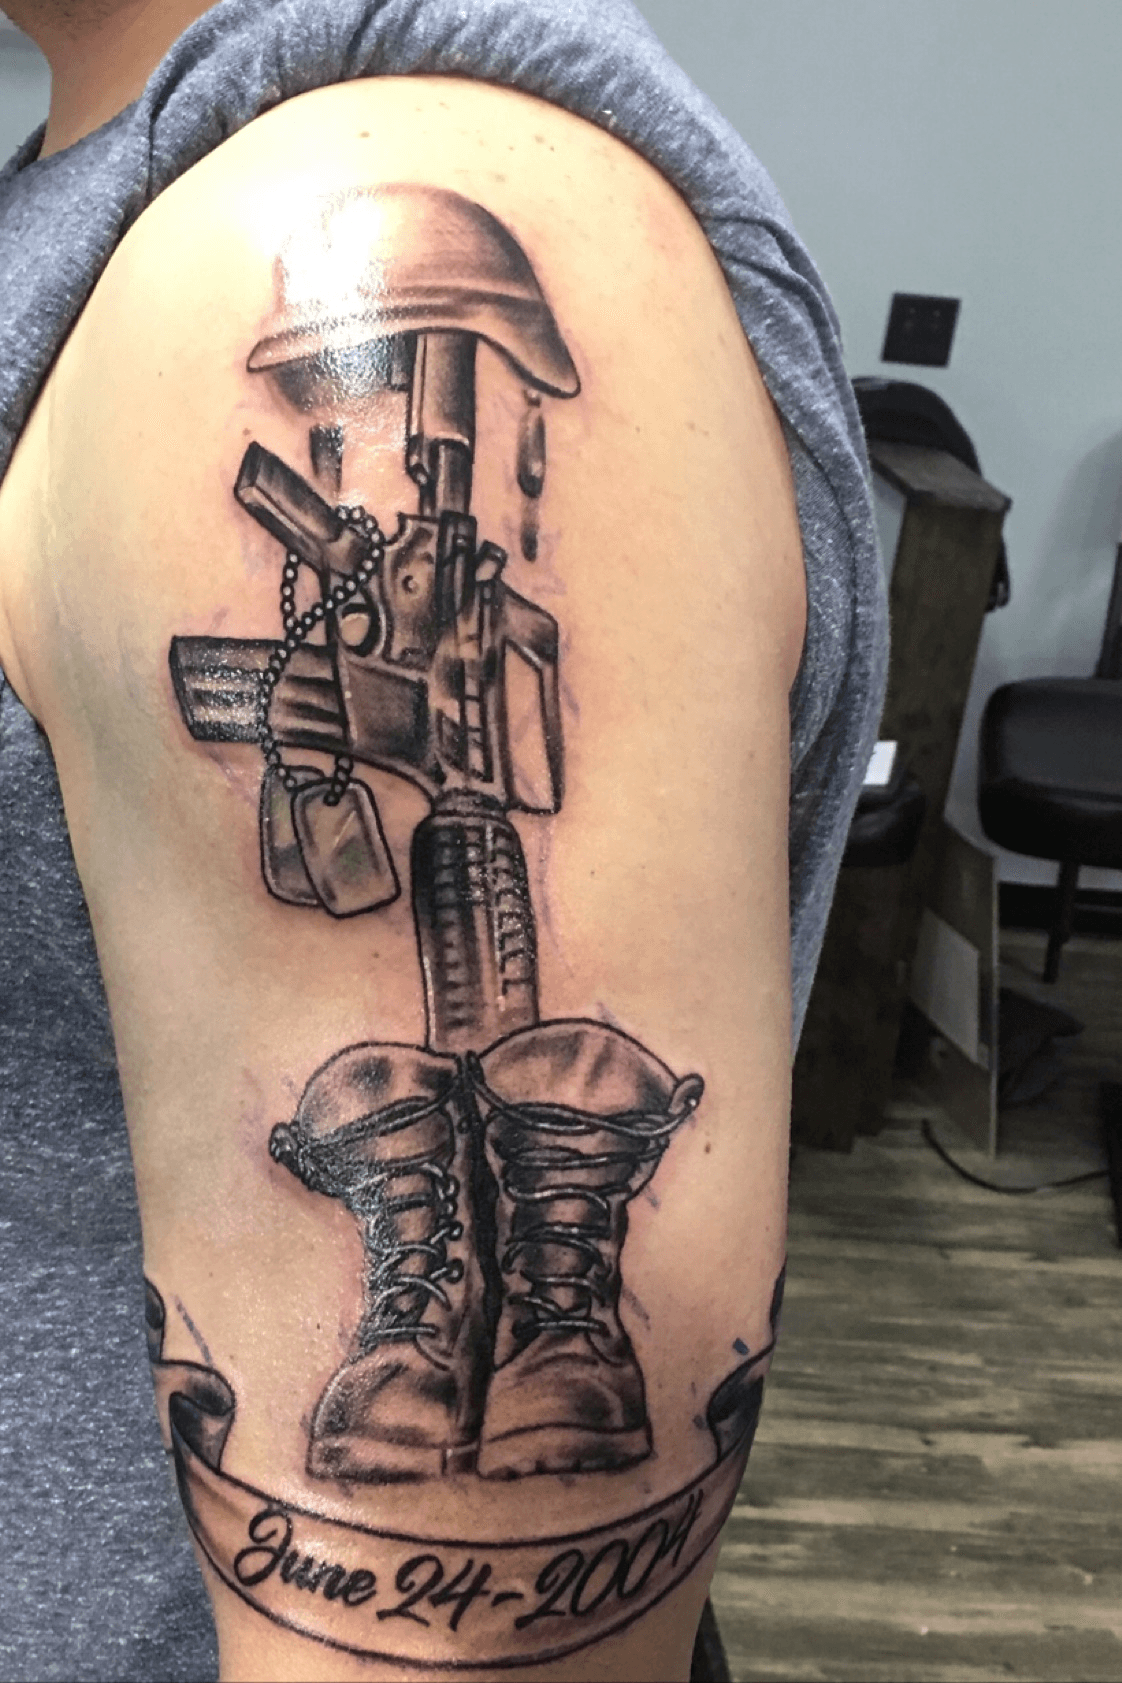 tattoos by lego  Got to do this fun army memorial tattoo  Facebook